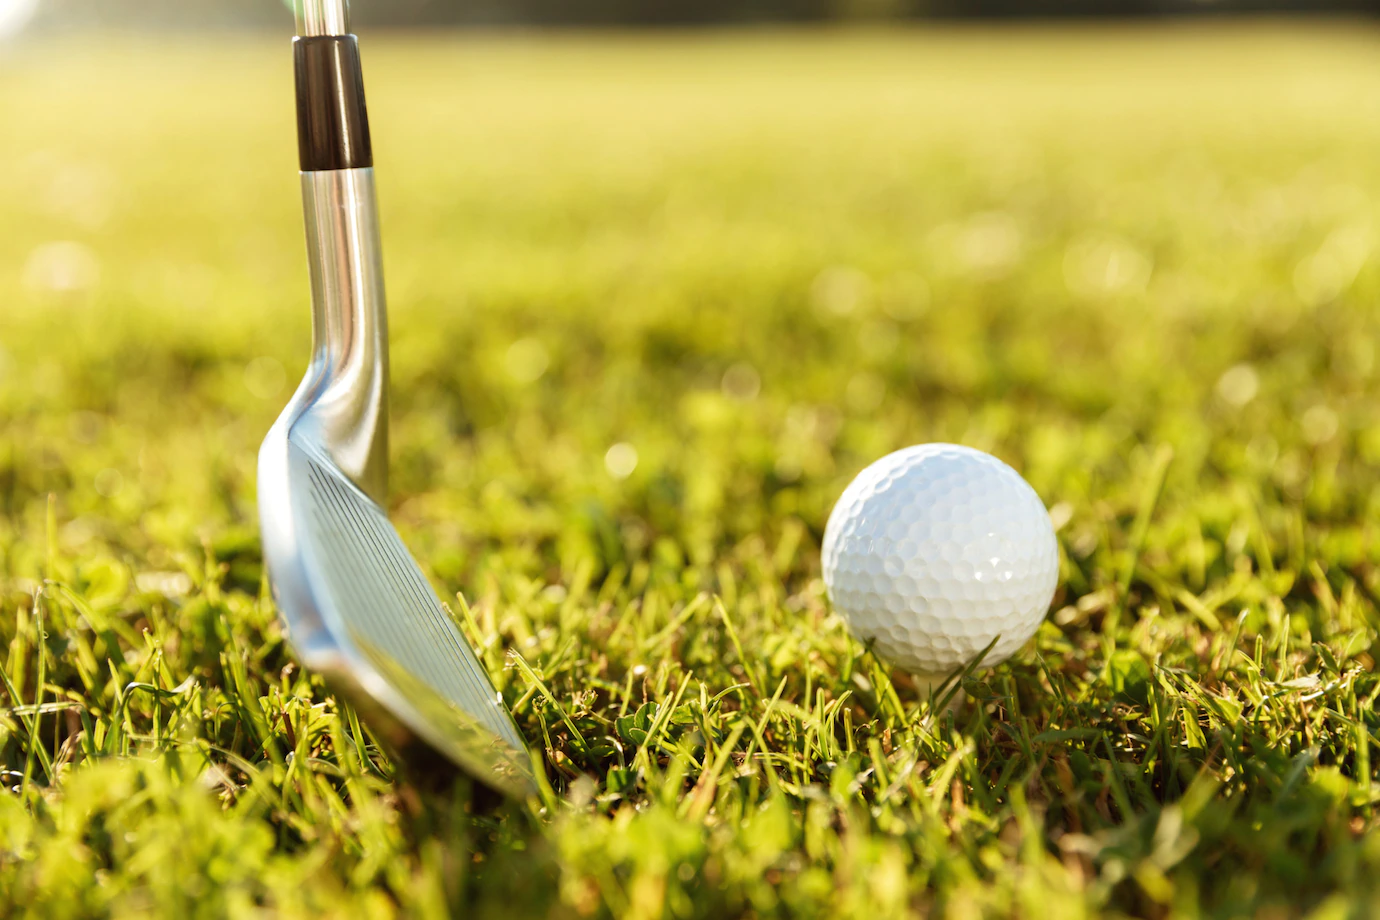 SPORTS WRAP: GOLFERS POLISH THEIR GAMES FOR DISTRICT PLAY